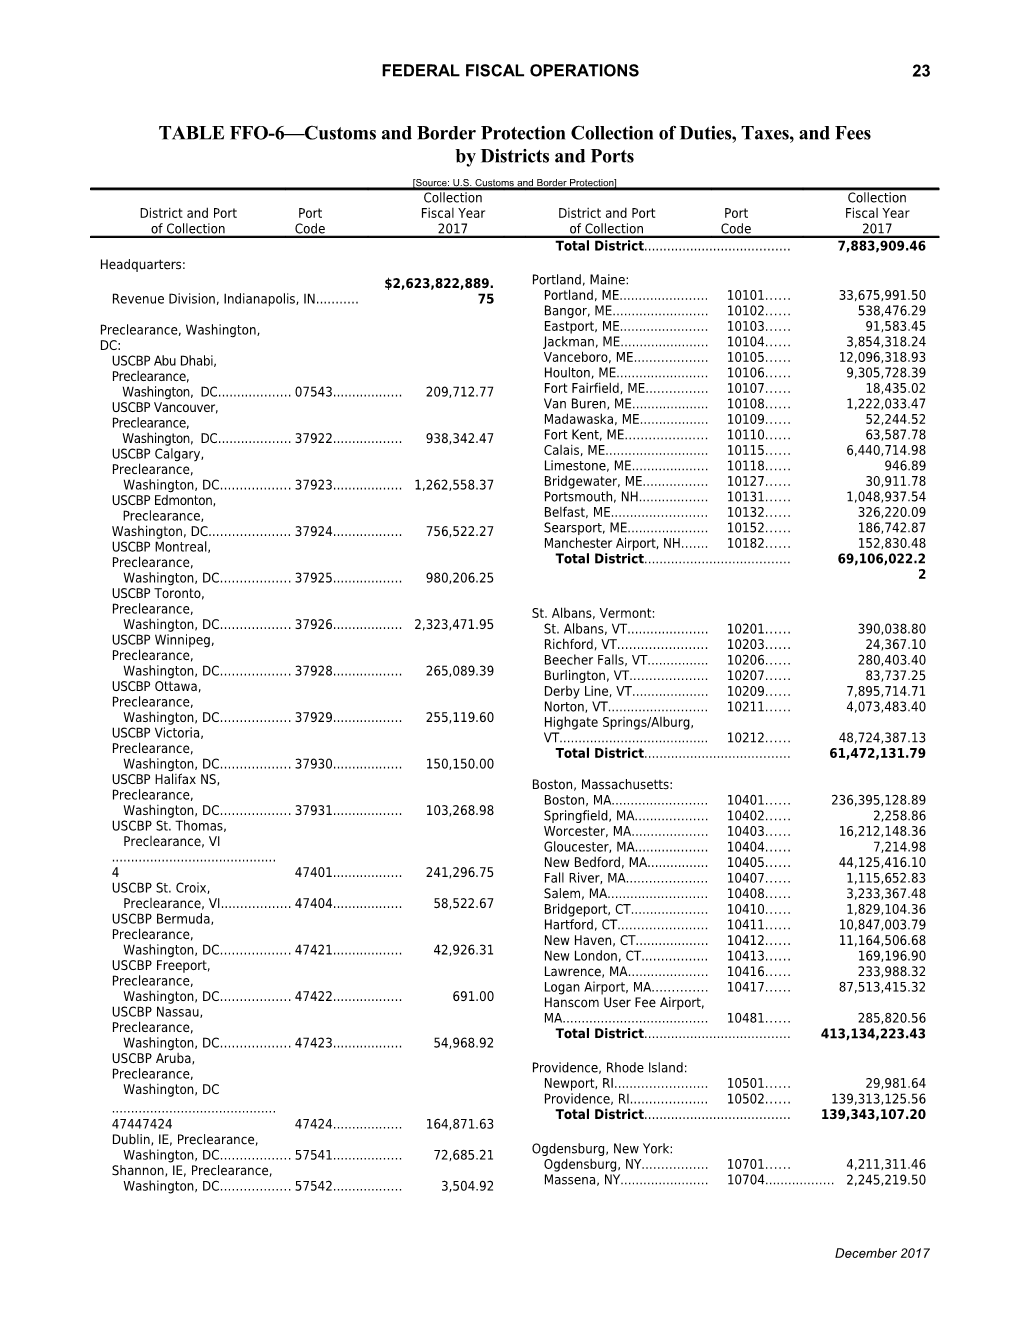 March 2002 Treasury Bulletin Printing Sequence Sheet As of 7/21/02